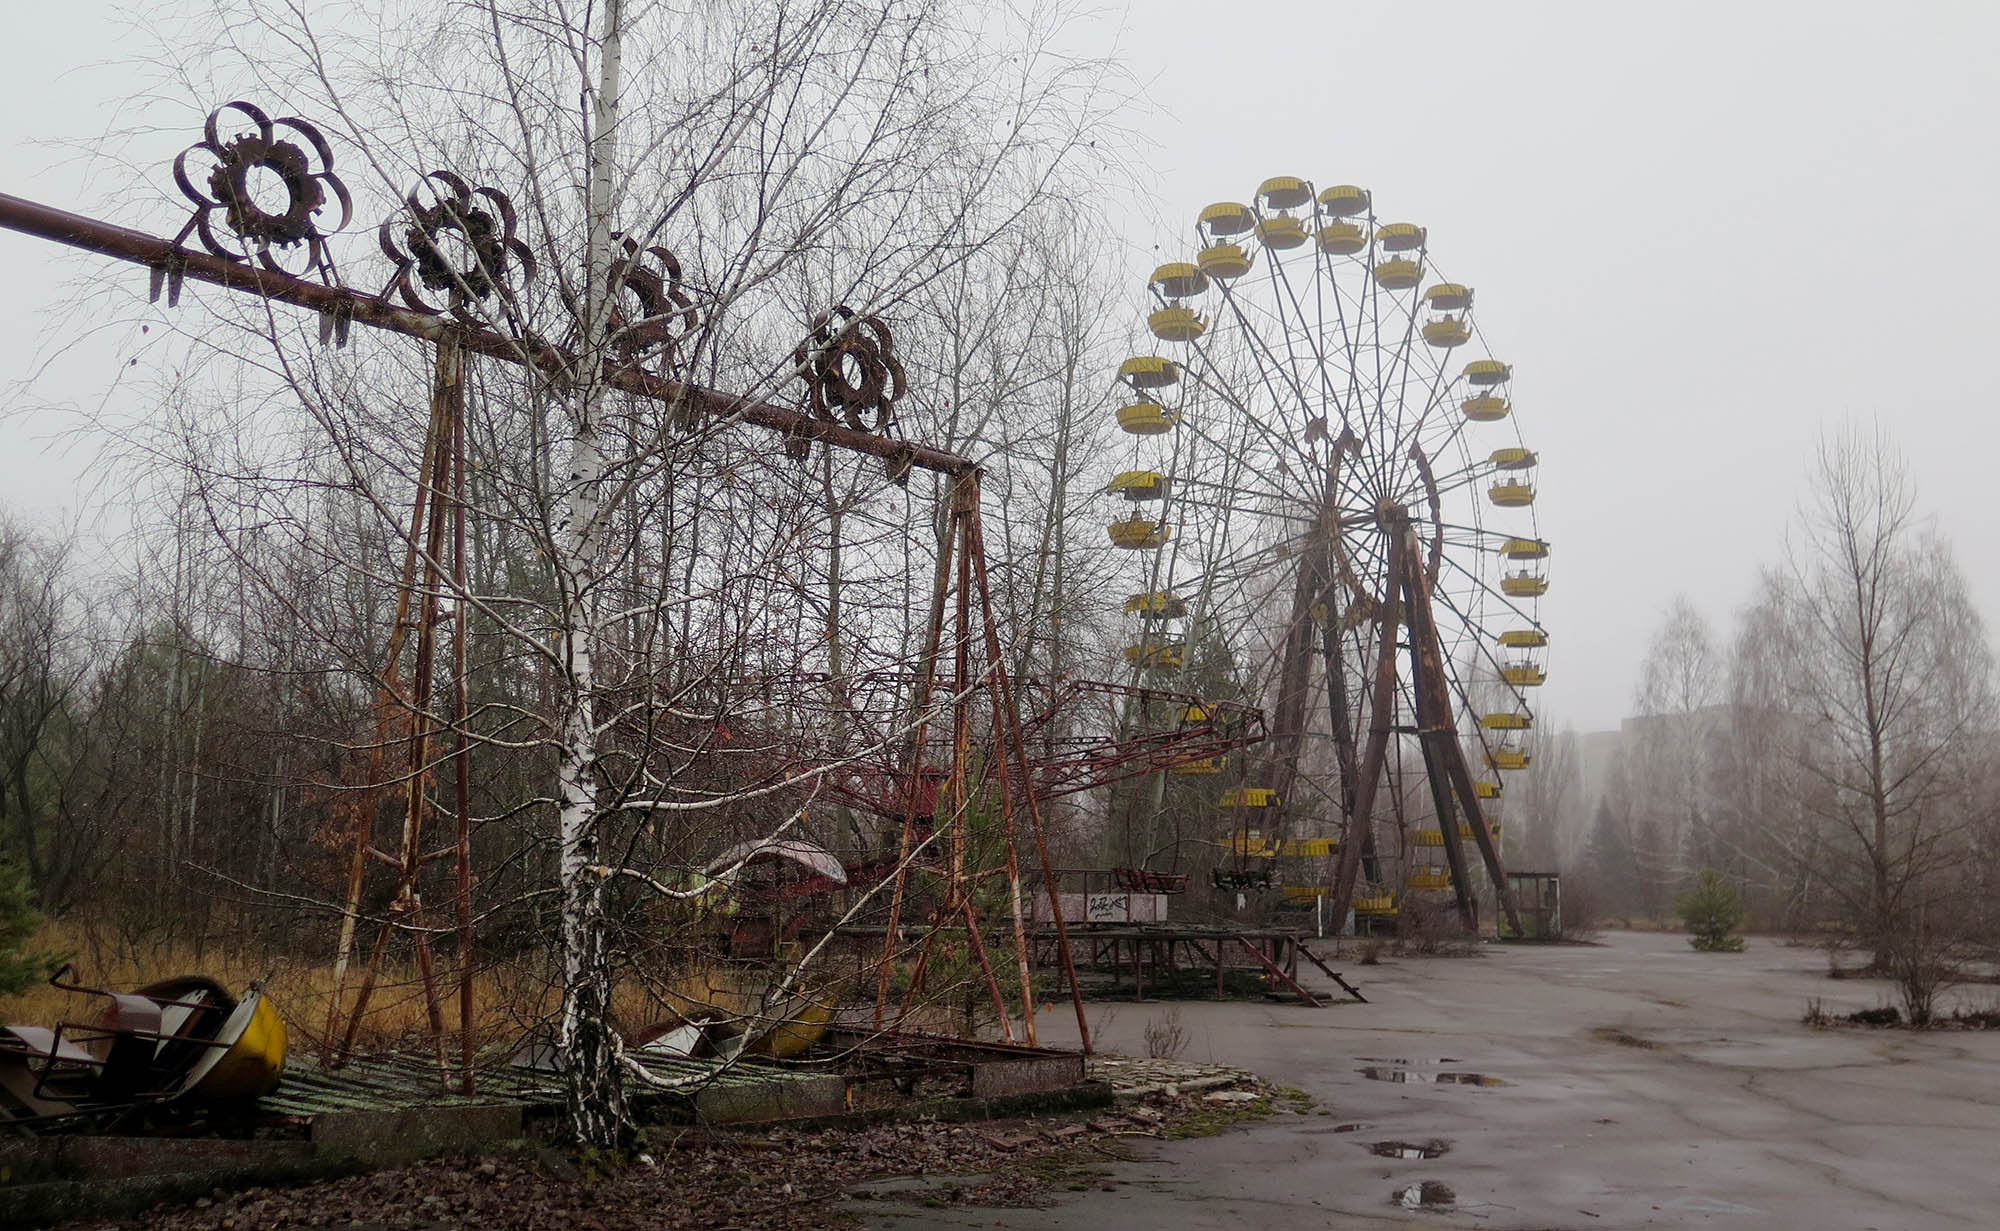 The swings and ferris wheel remain in an amusement park that was scheduled to open on May 1, 1986, for the Soviet May Day celebrations in Pirpyat, Ukraine. It never opened, as the Chernobyl disaster happened on April 26, 1986, a week before the opening.